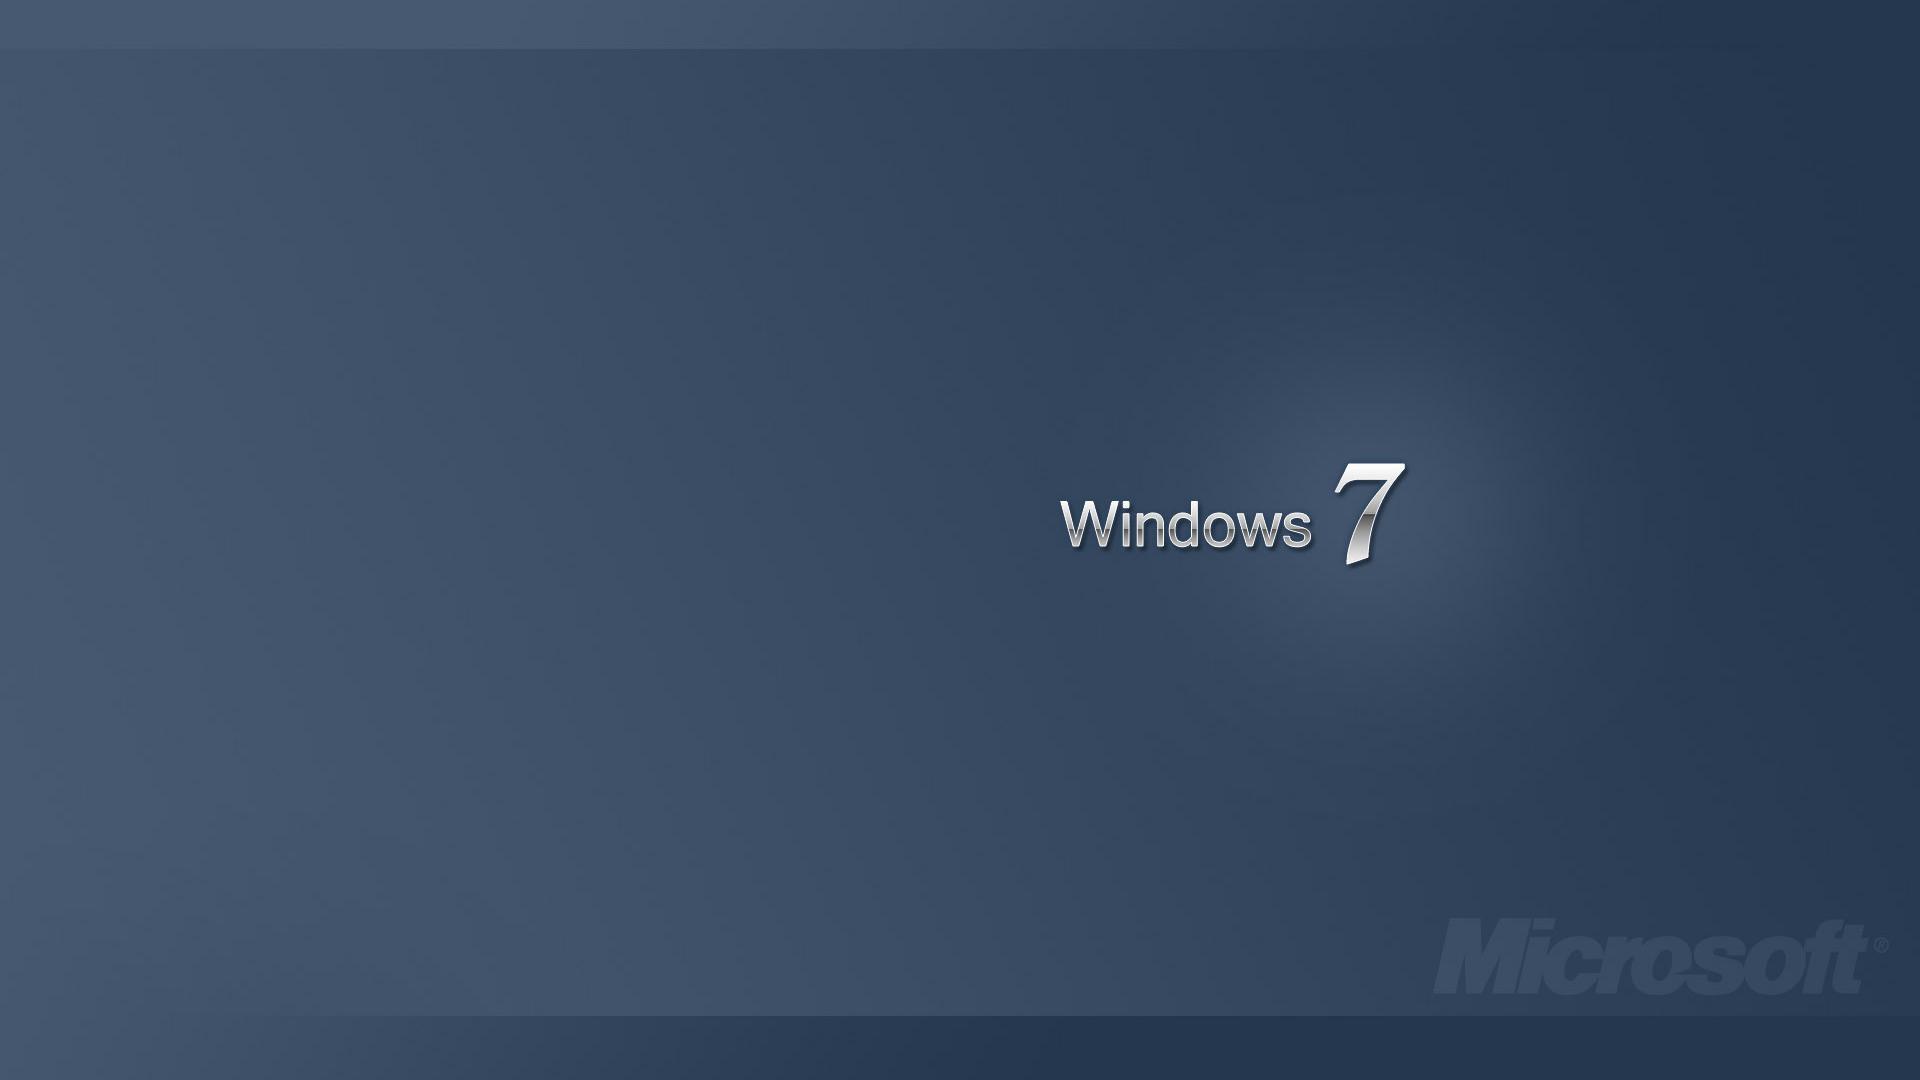 Concise Windows 7 Microsoft Background Widescreen and HD